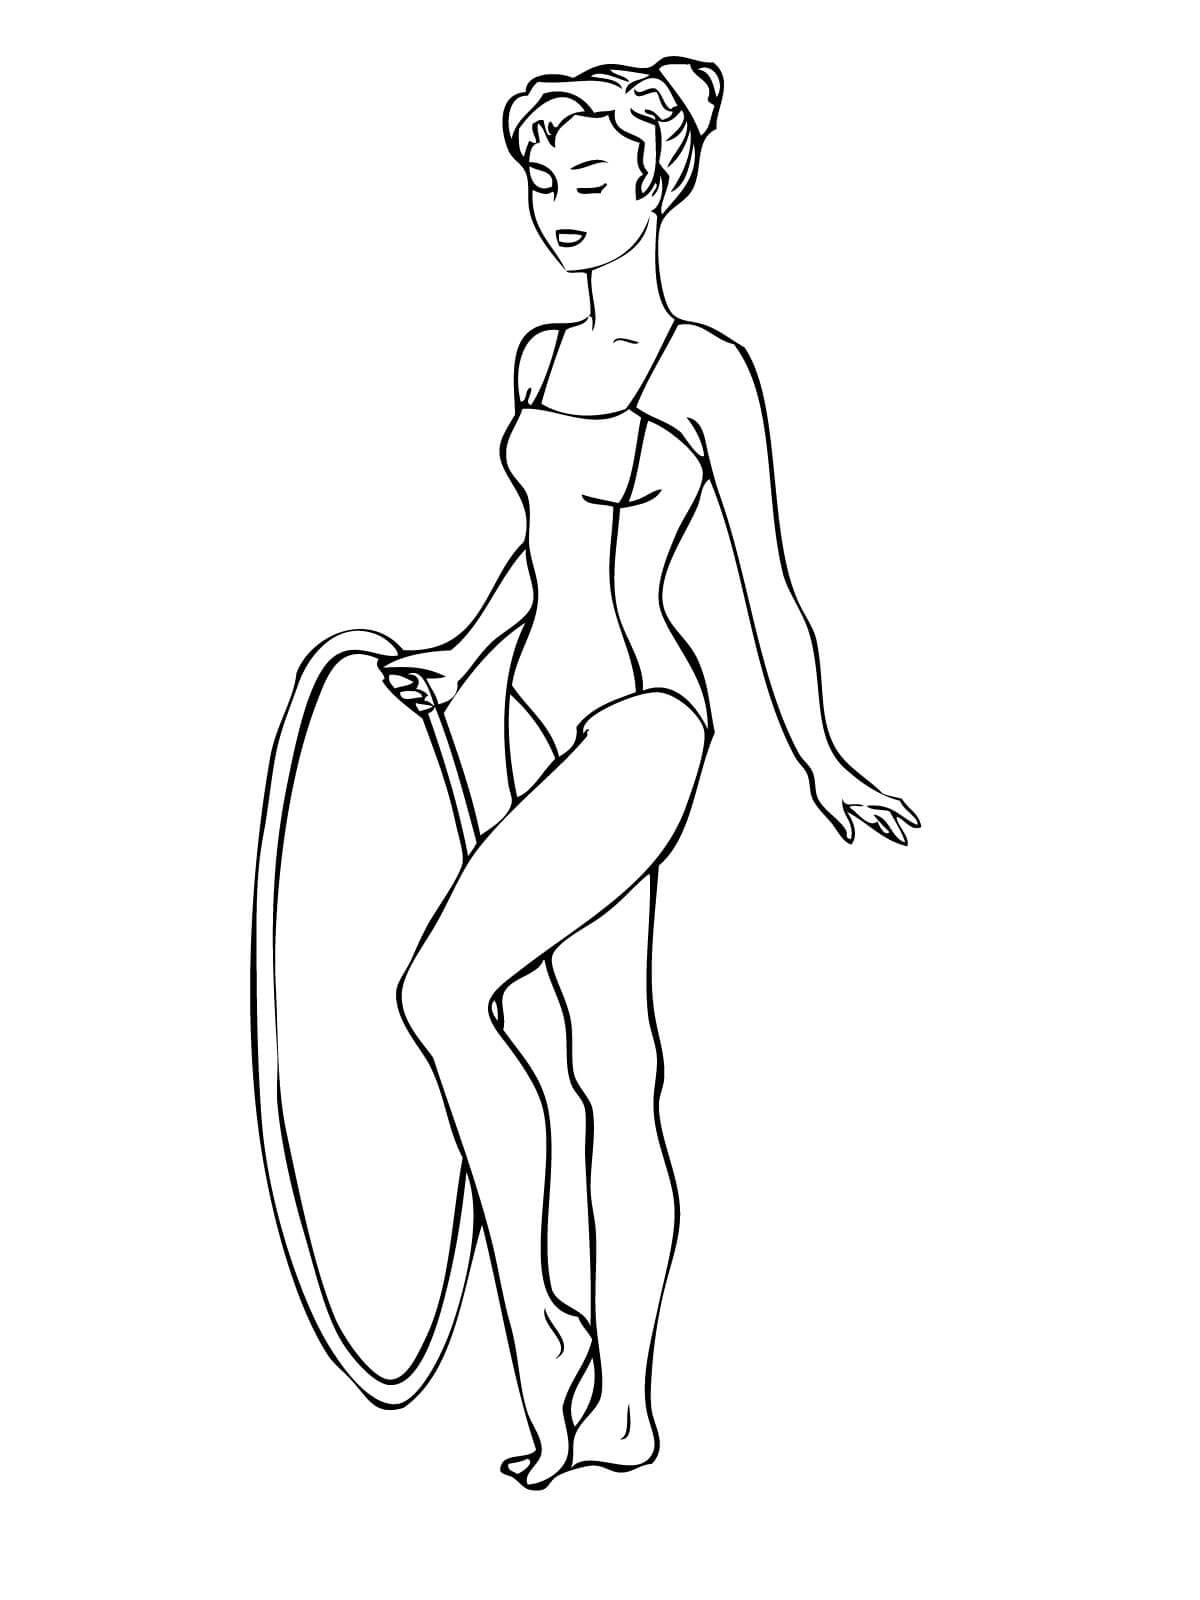 Gymnastic coloring pages to download and print for free